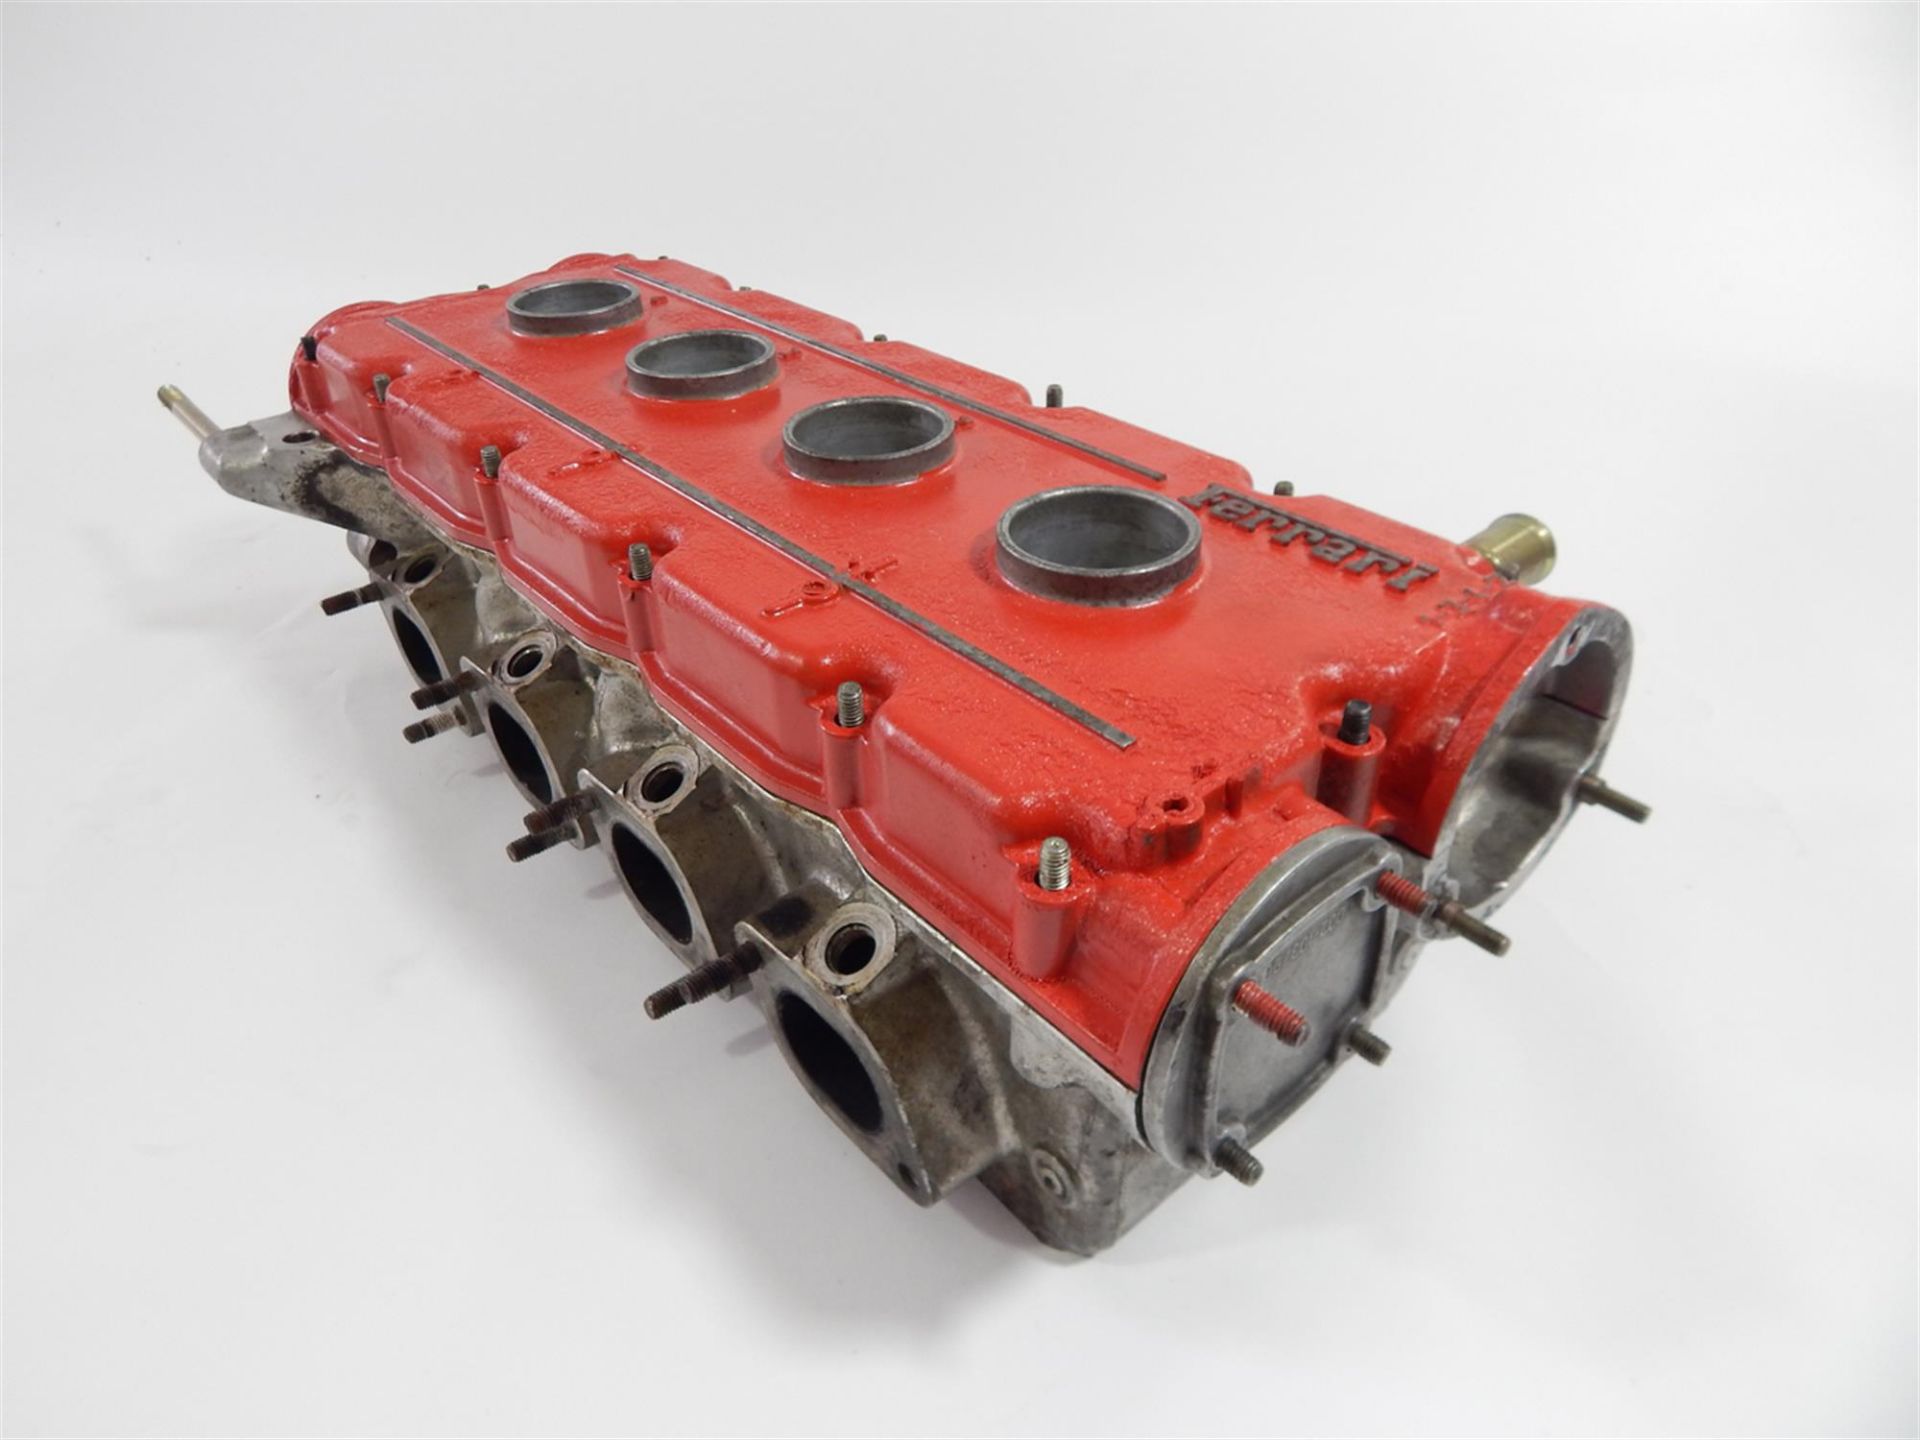 1984 - 1985 Ferrari 308 QV V8 Cylinder Heads + Cam Covers (Pair) - Image 5 of 8